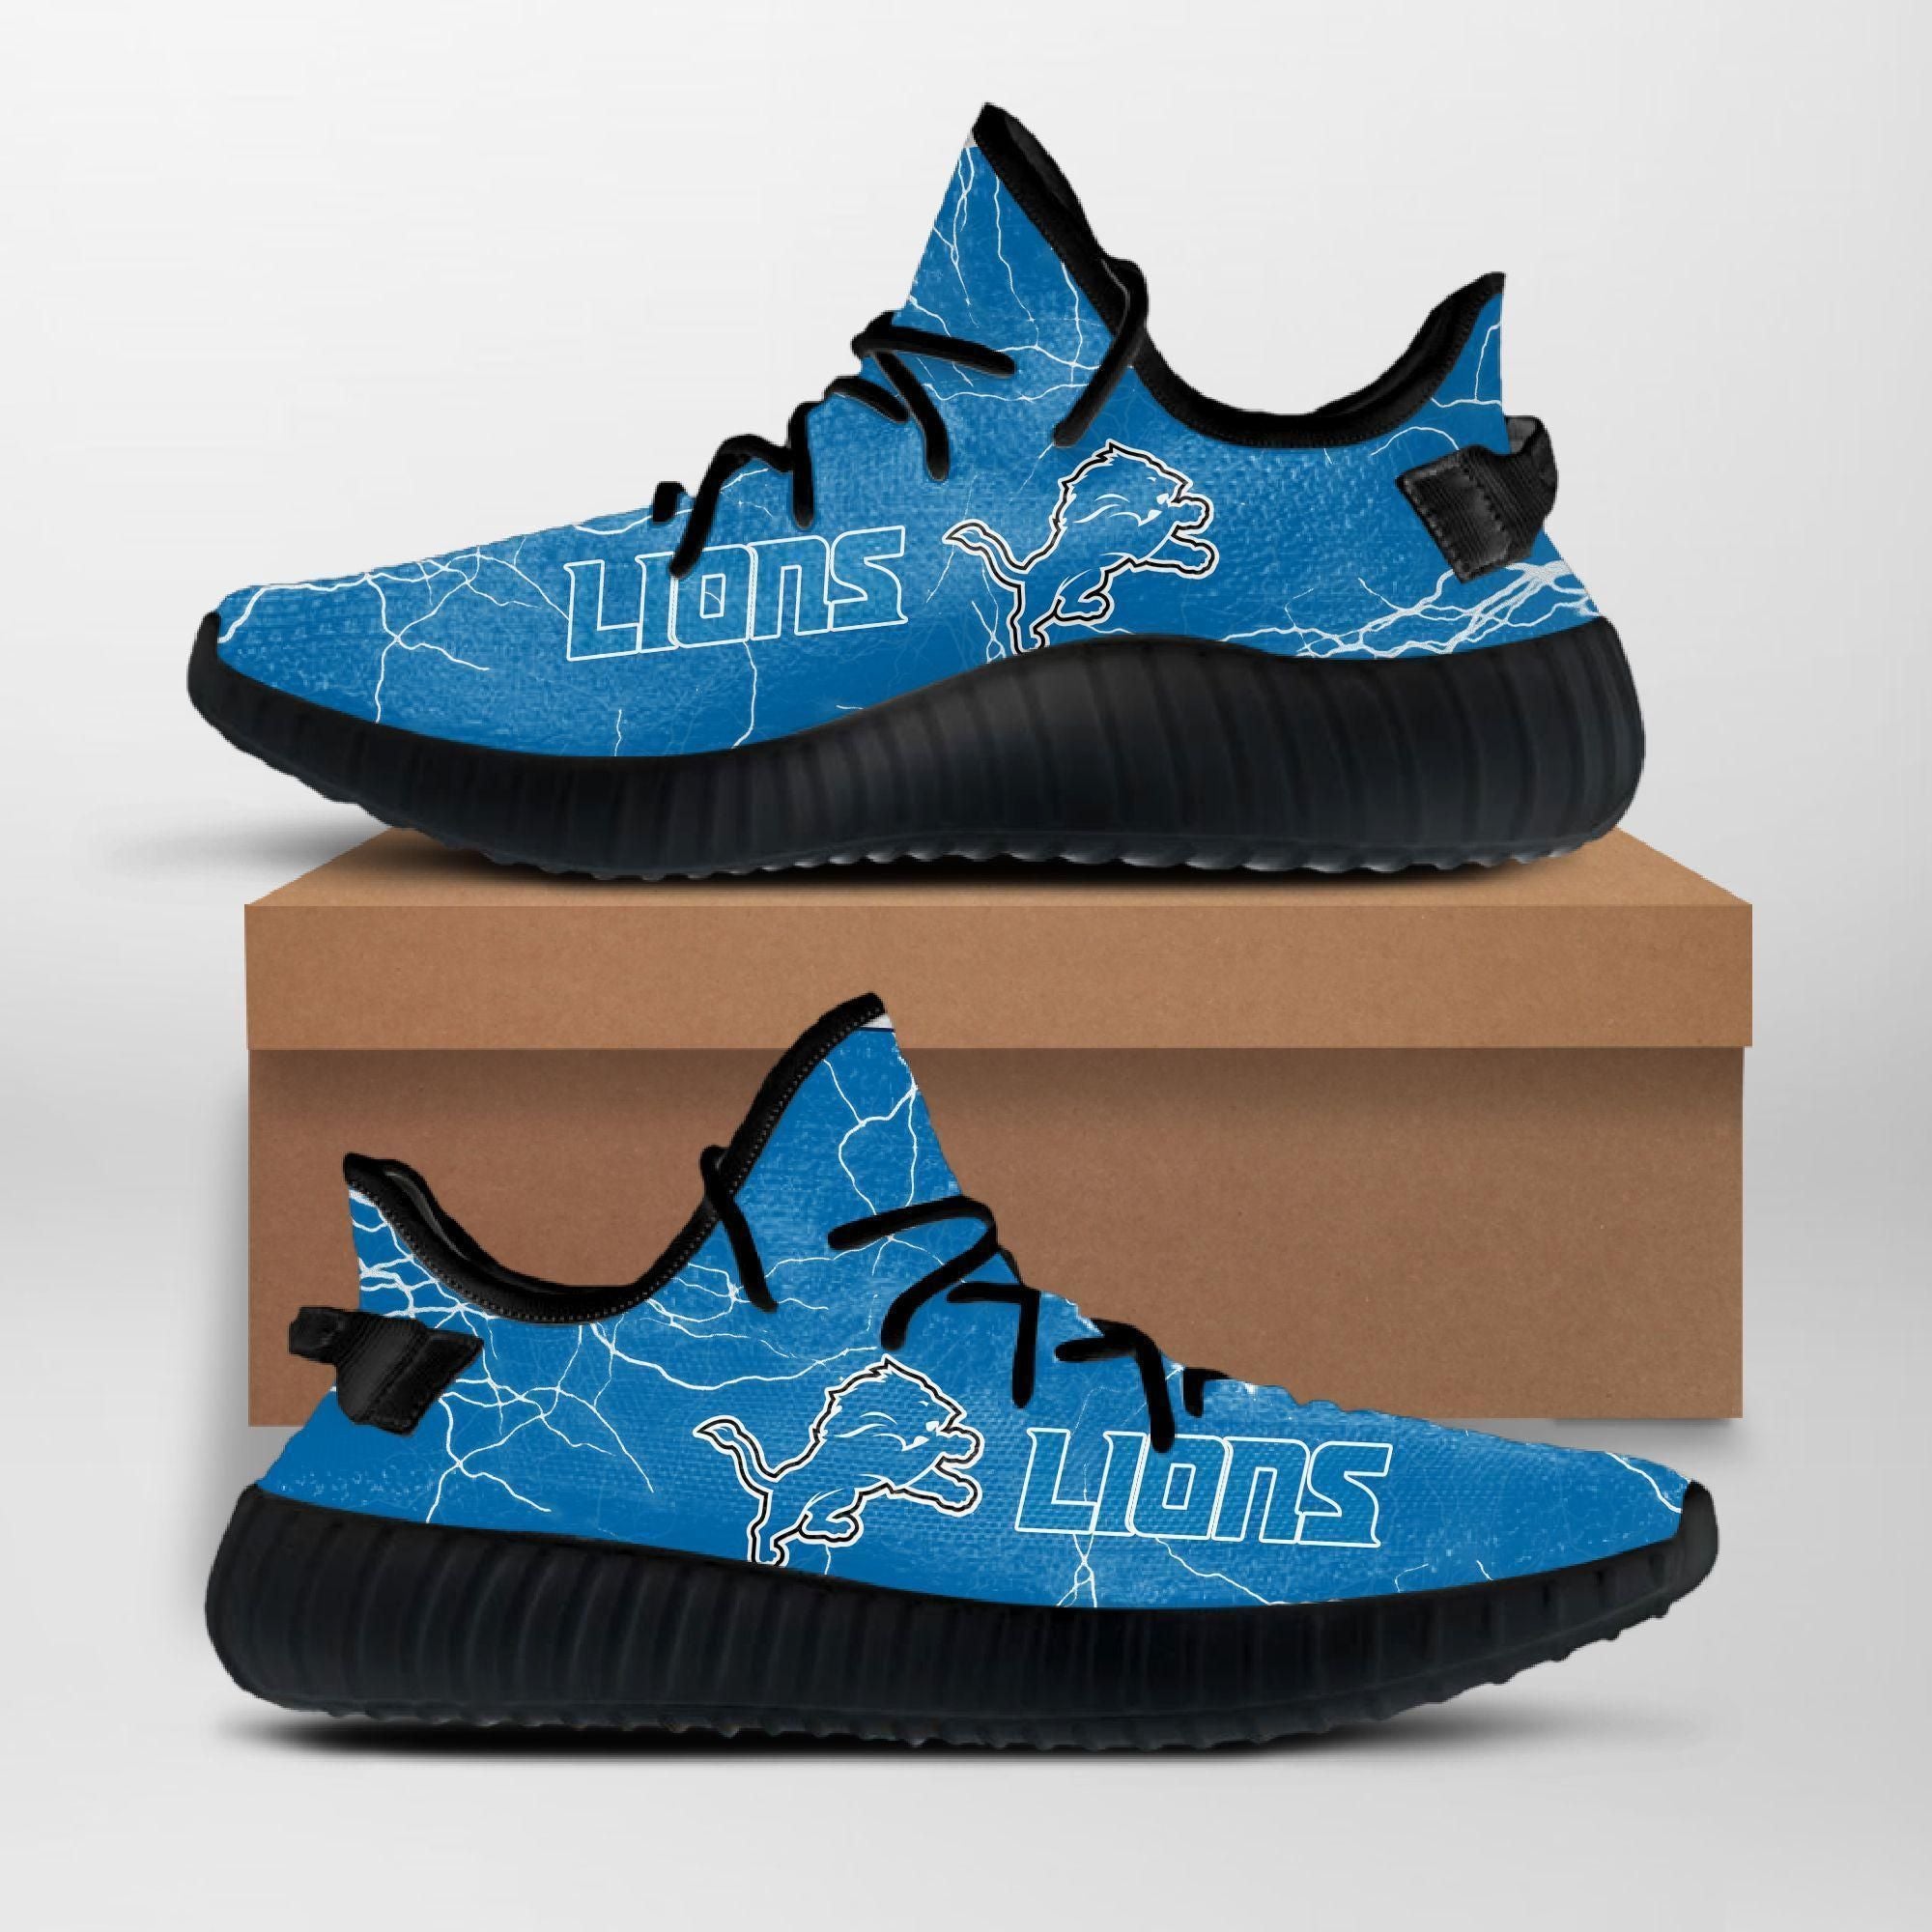 Buy Detroit Lions Nfl Custom Yeezy Shoes For Fans Custom Shoes - HomeFavo